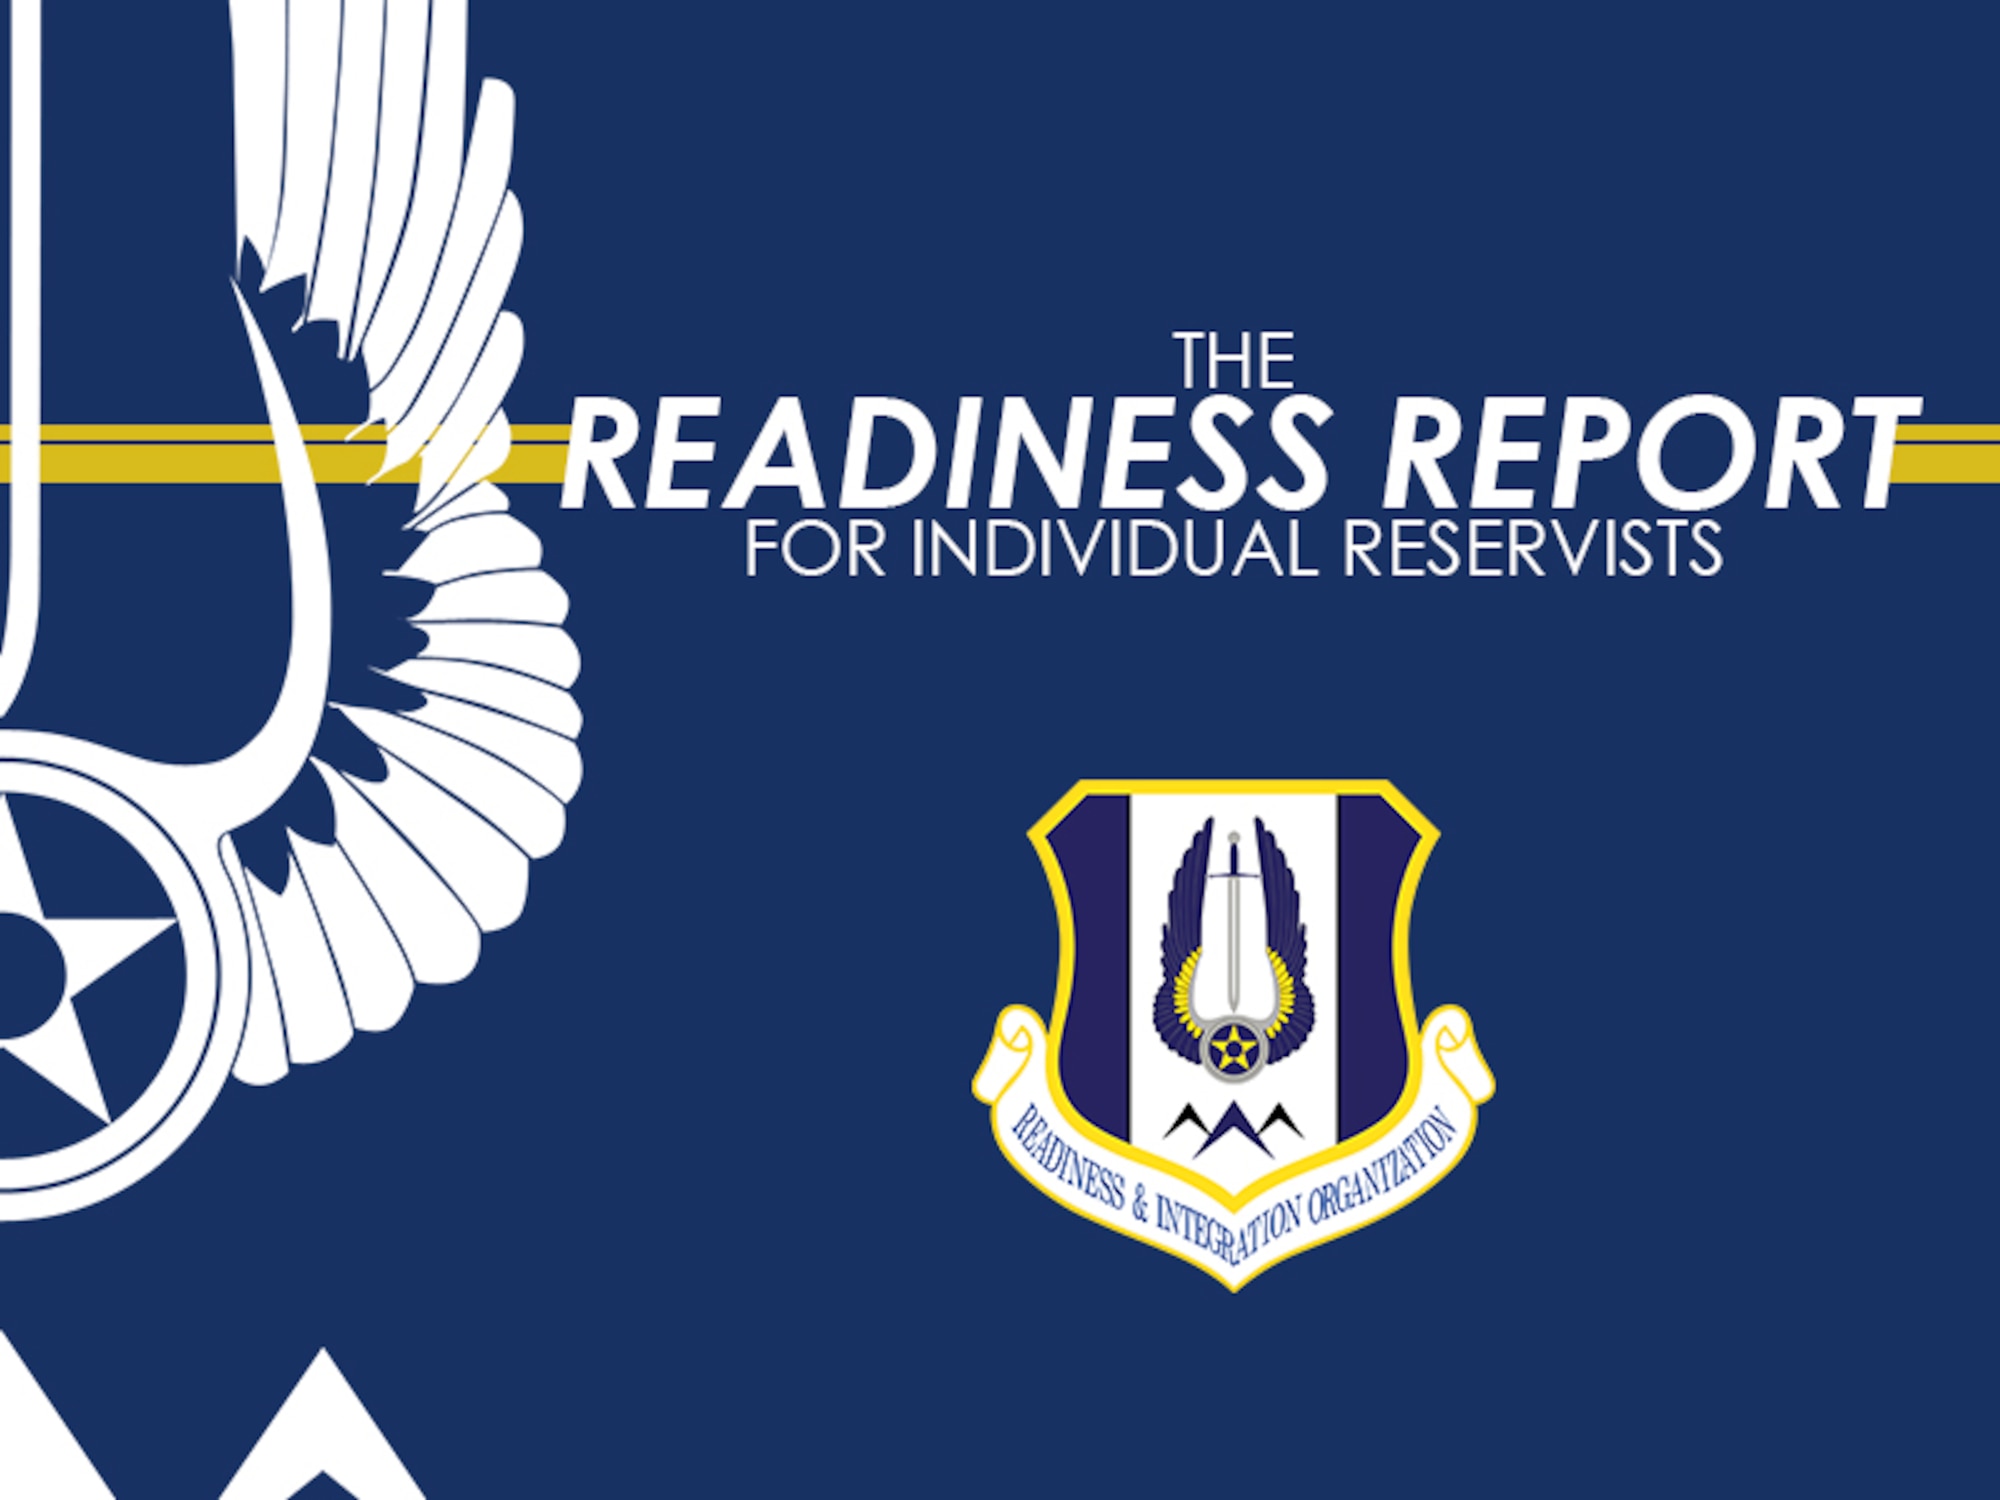 The Readiness Report is published monthly for Individual Reservists.